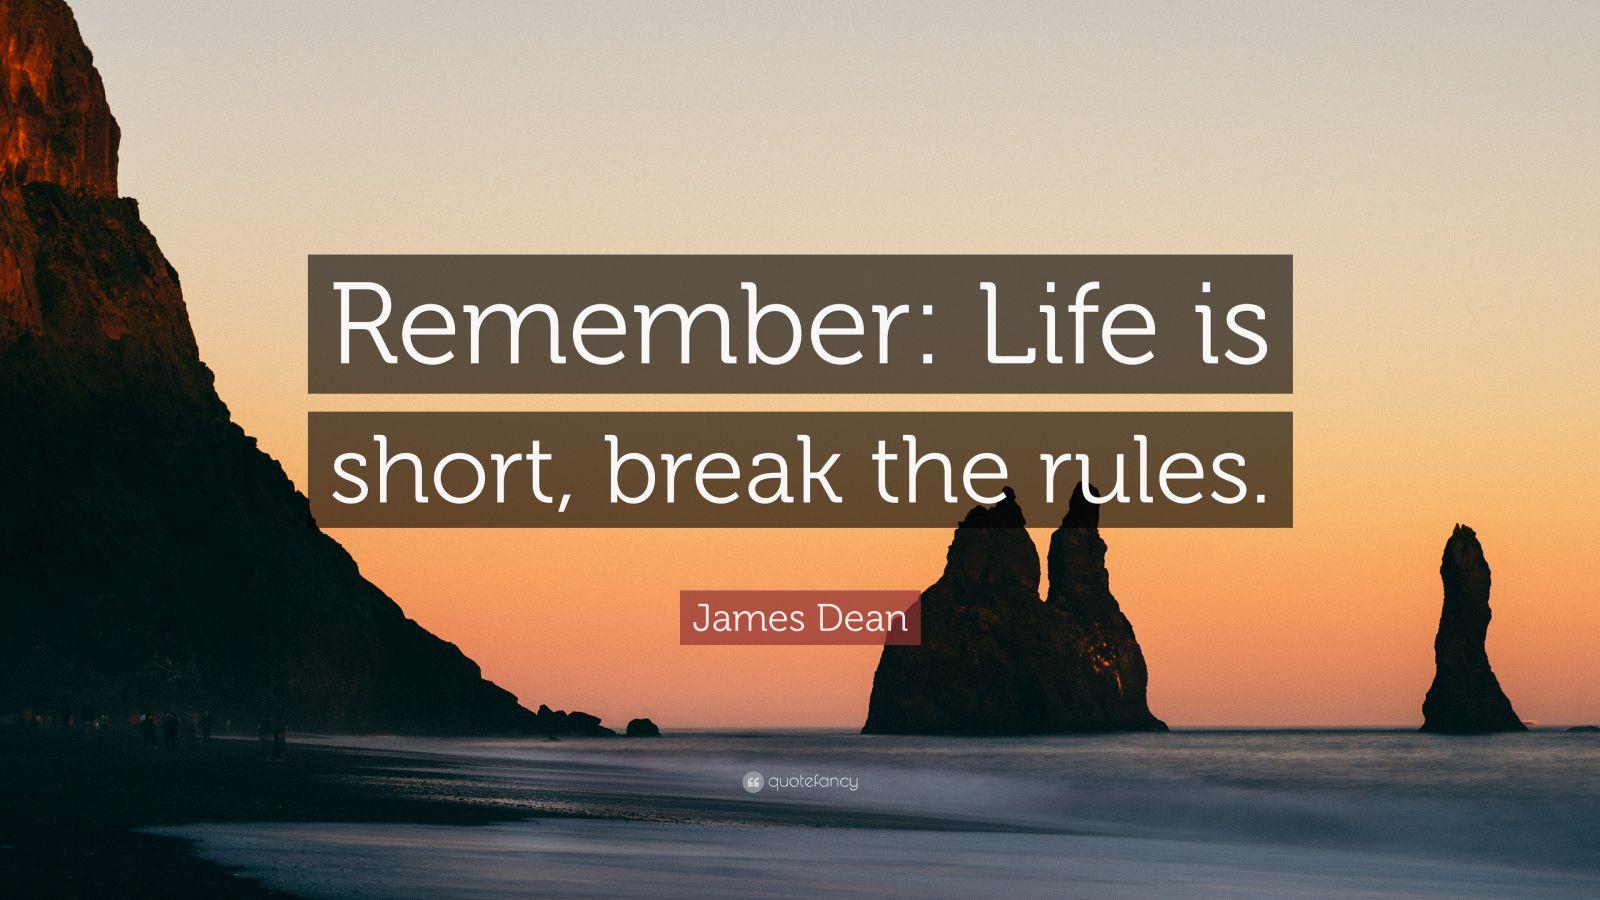 James Dean Quote: “Remember: Life is short, break the rules.” (12 ...